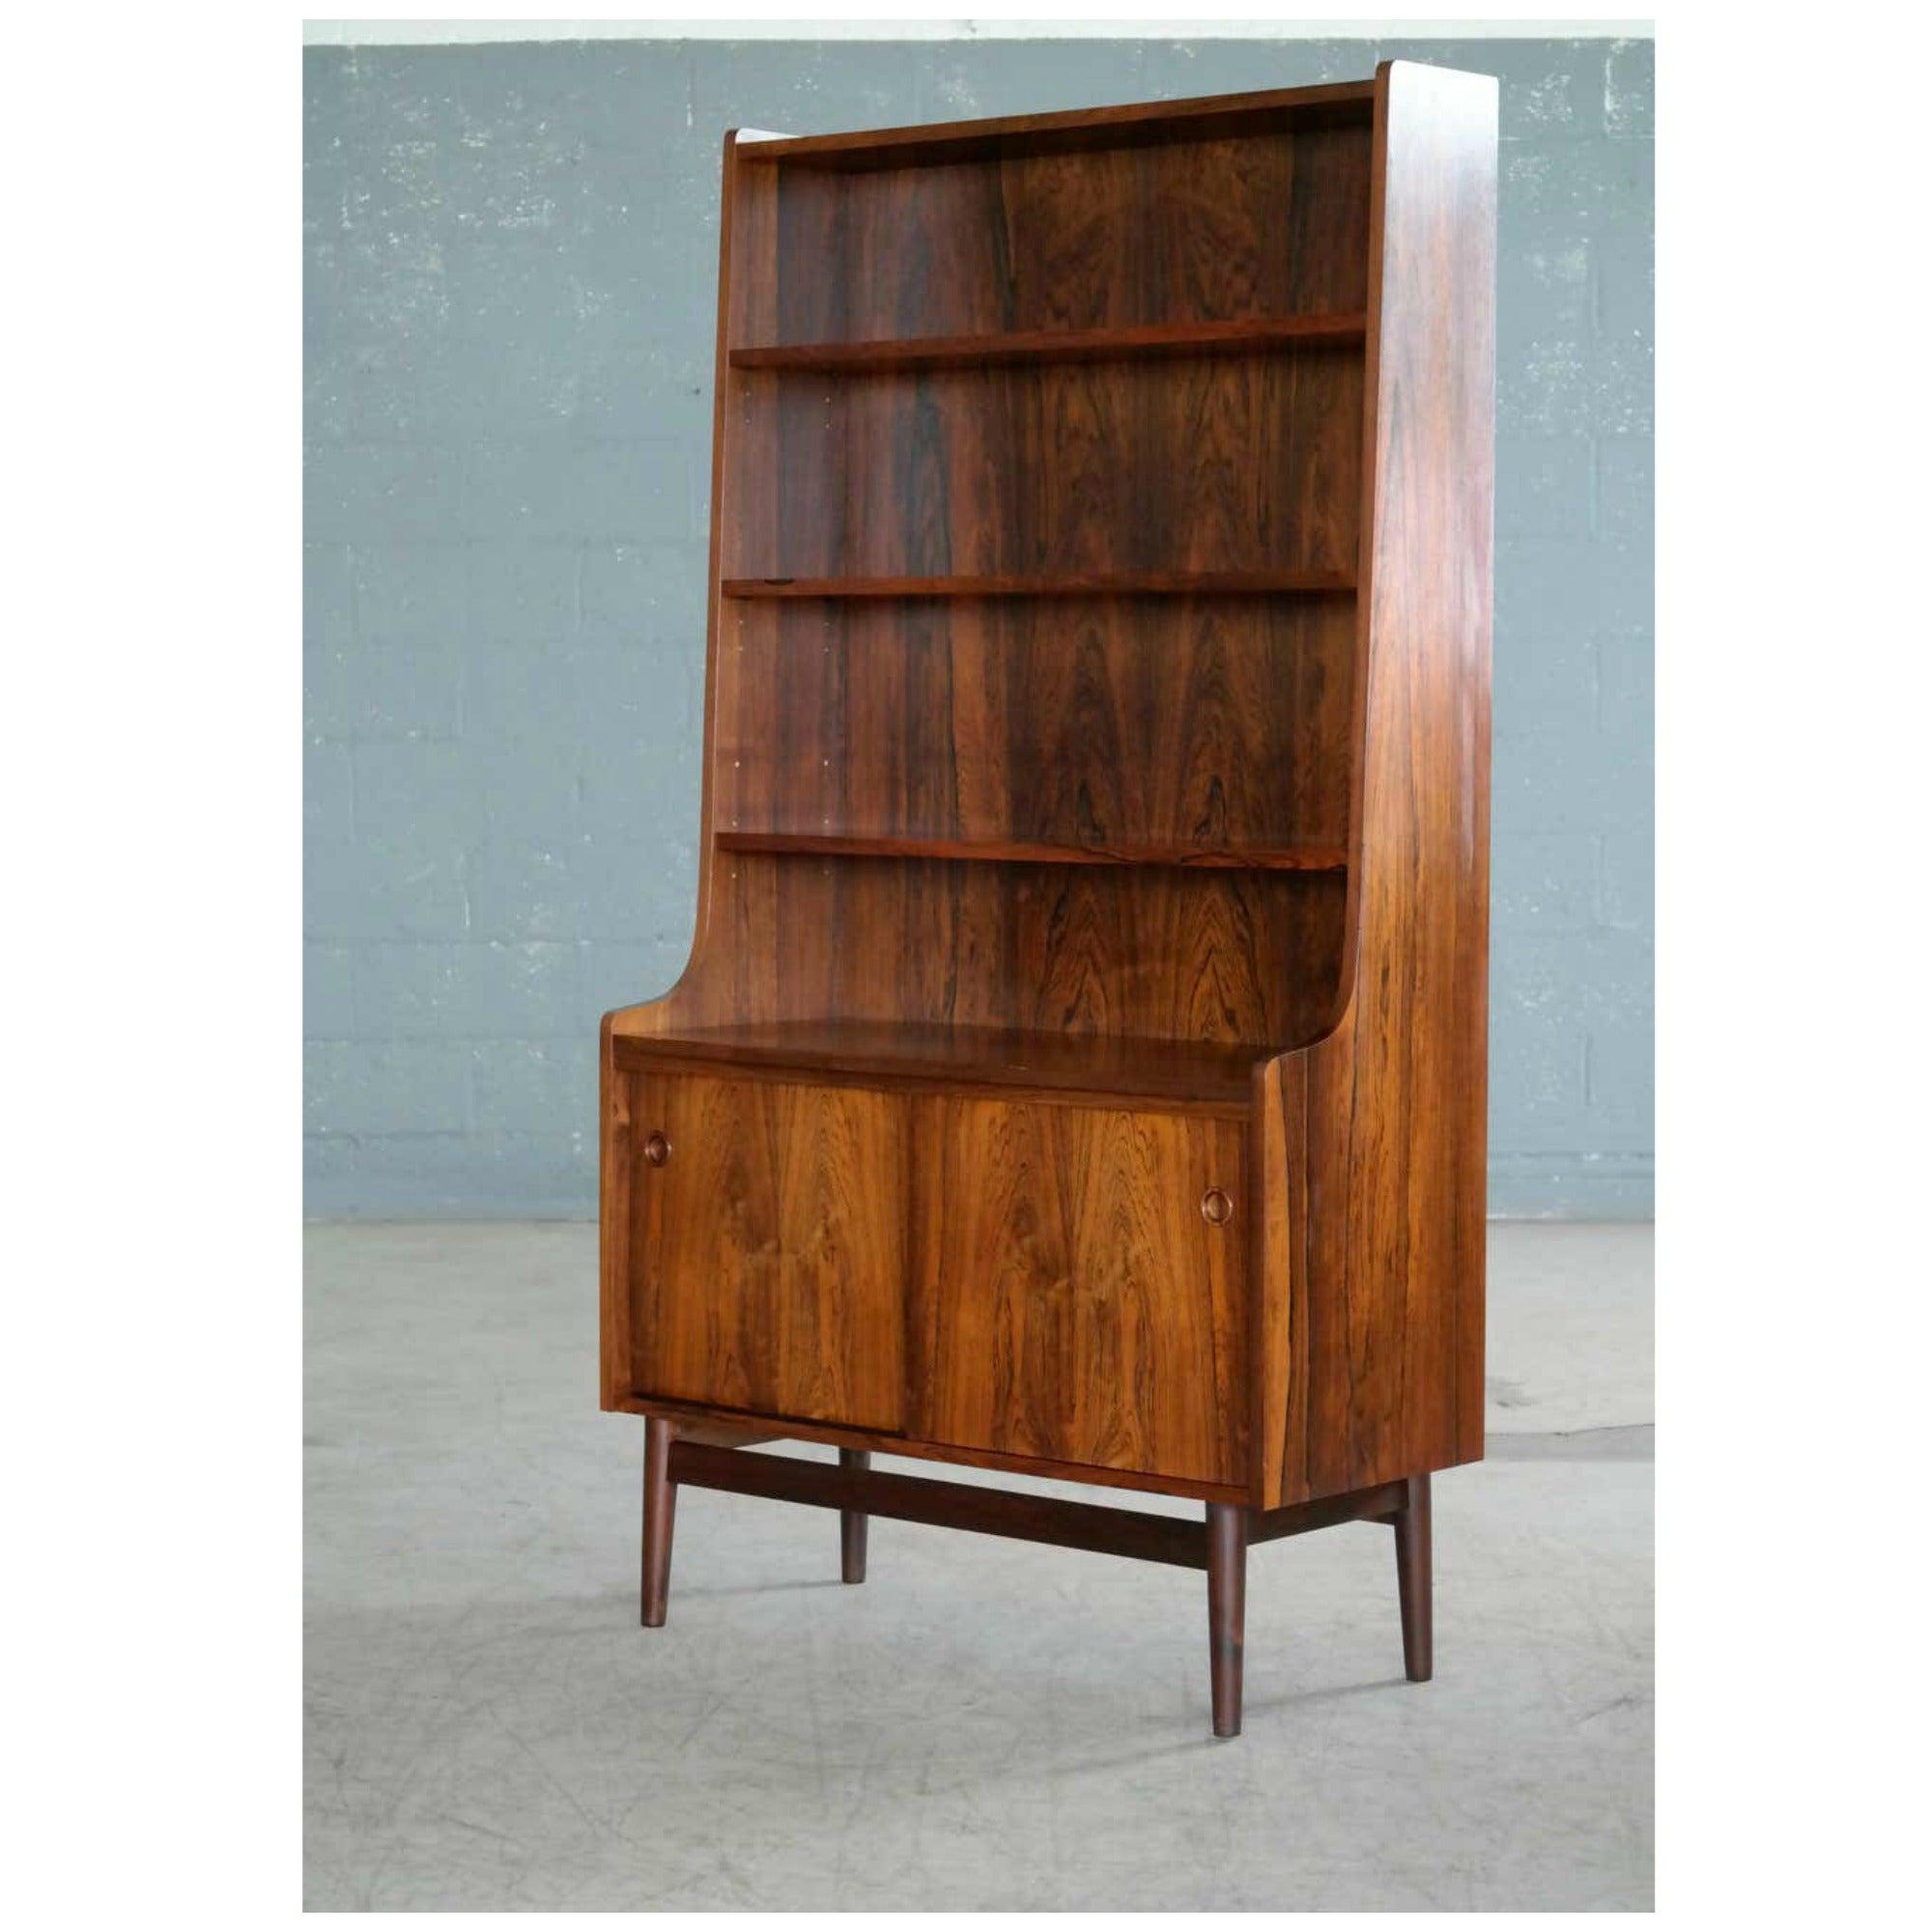 1960s Danish Modern Midcentury Pair of Bookcases in Rosewood by Johannes Sorth 1